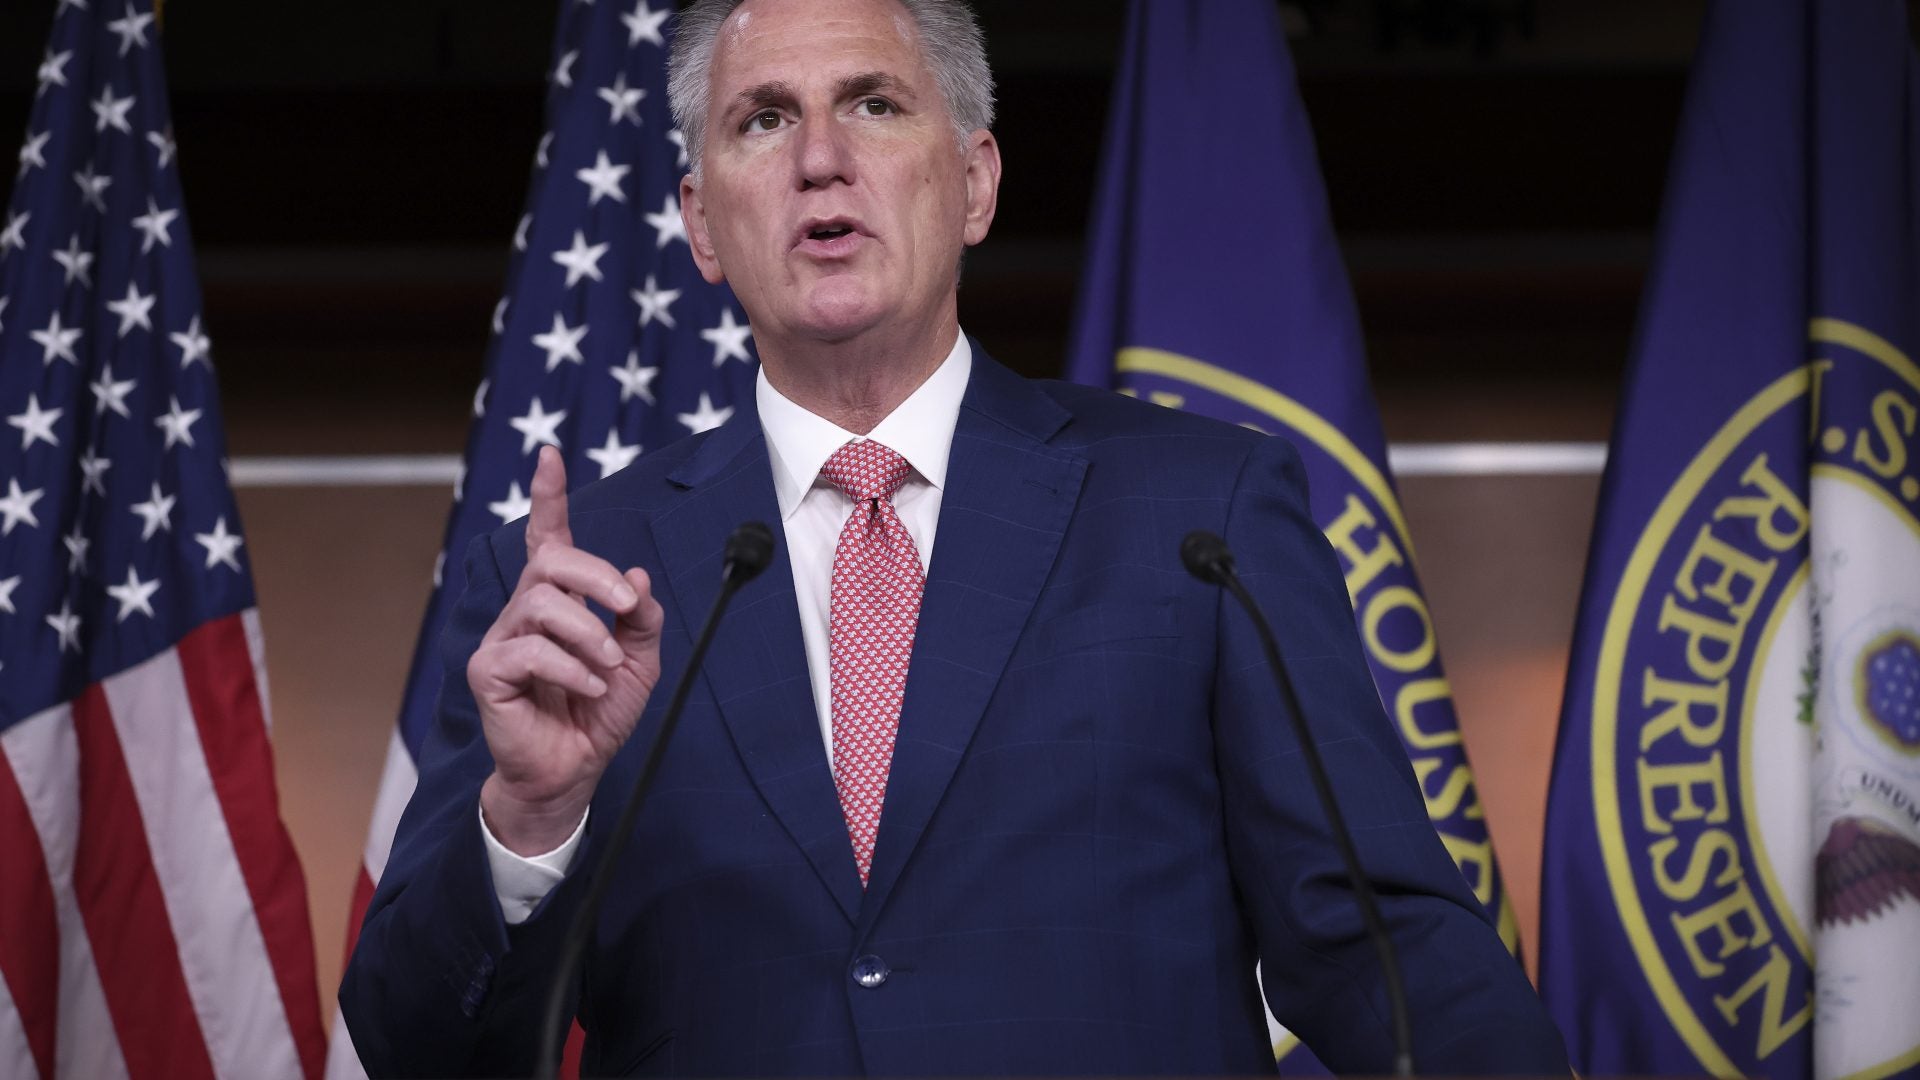 Kevin McCarthy Was Ousted As Speaker Of The House. Here's What This Means And What Happens Next